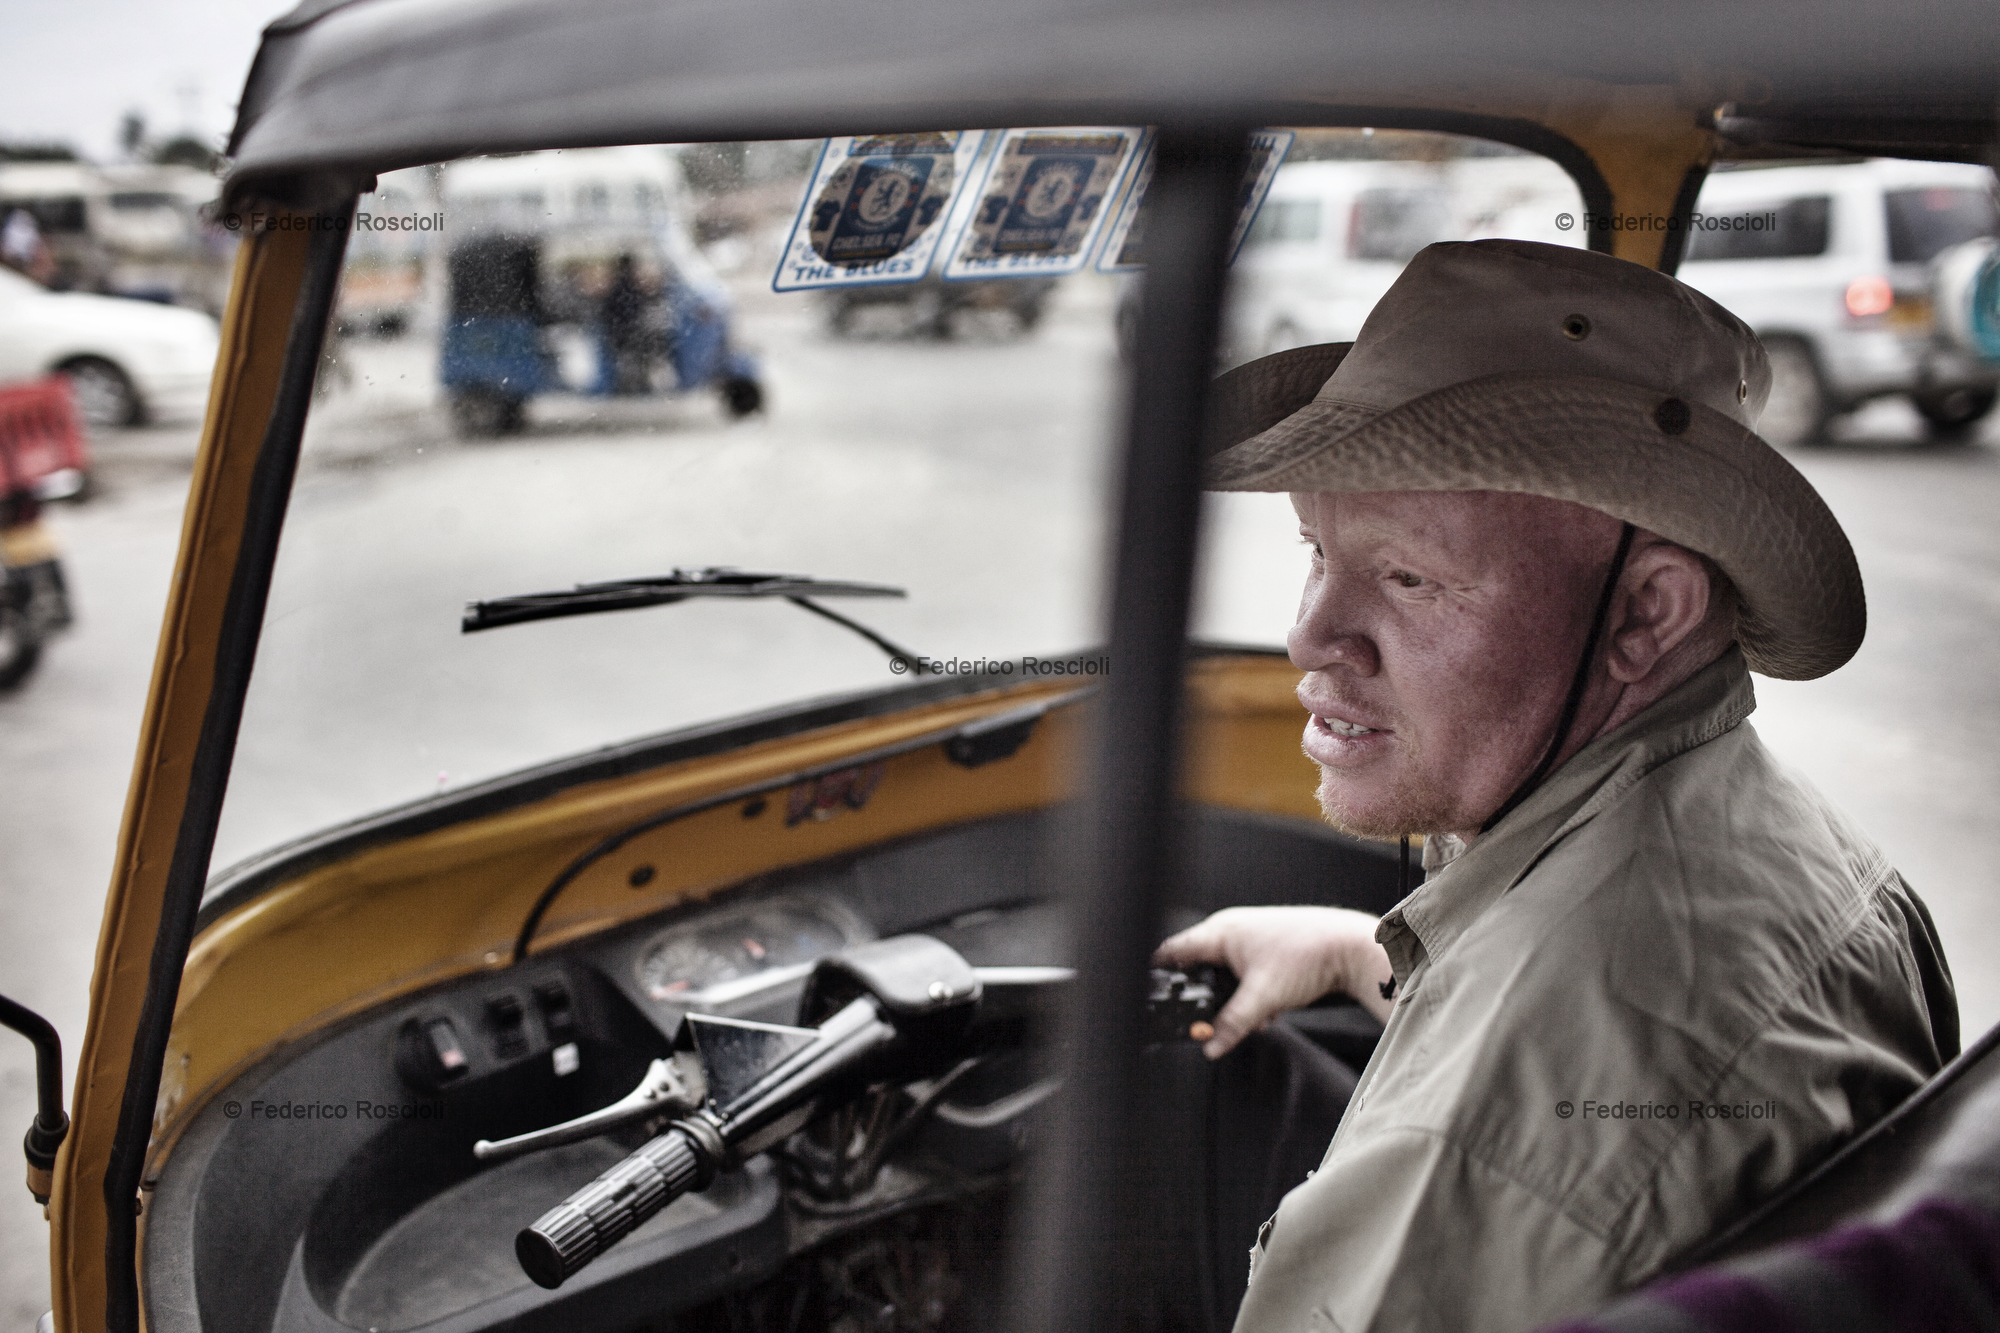 Dar es Salaam, Tanzania, July 29, 2014 - Redman in his room. He is a bajaj driver in Dar es Salaam, Tanzania. Despite albinism, he has been a driver for 9 years, the last 3 on a bajaj. A Bajaj is a three-wheel taxi, perfect to move in Dar traffic. Being covered on the top, it is also a shield from the sun for an albino.